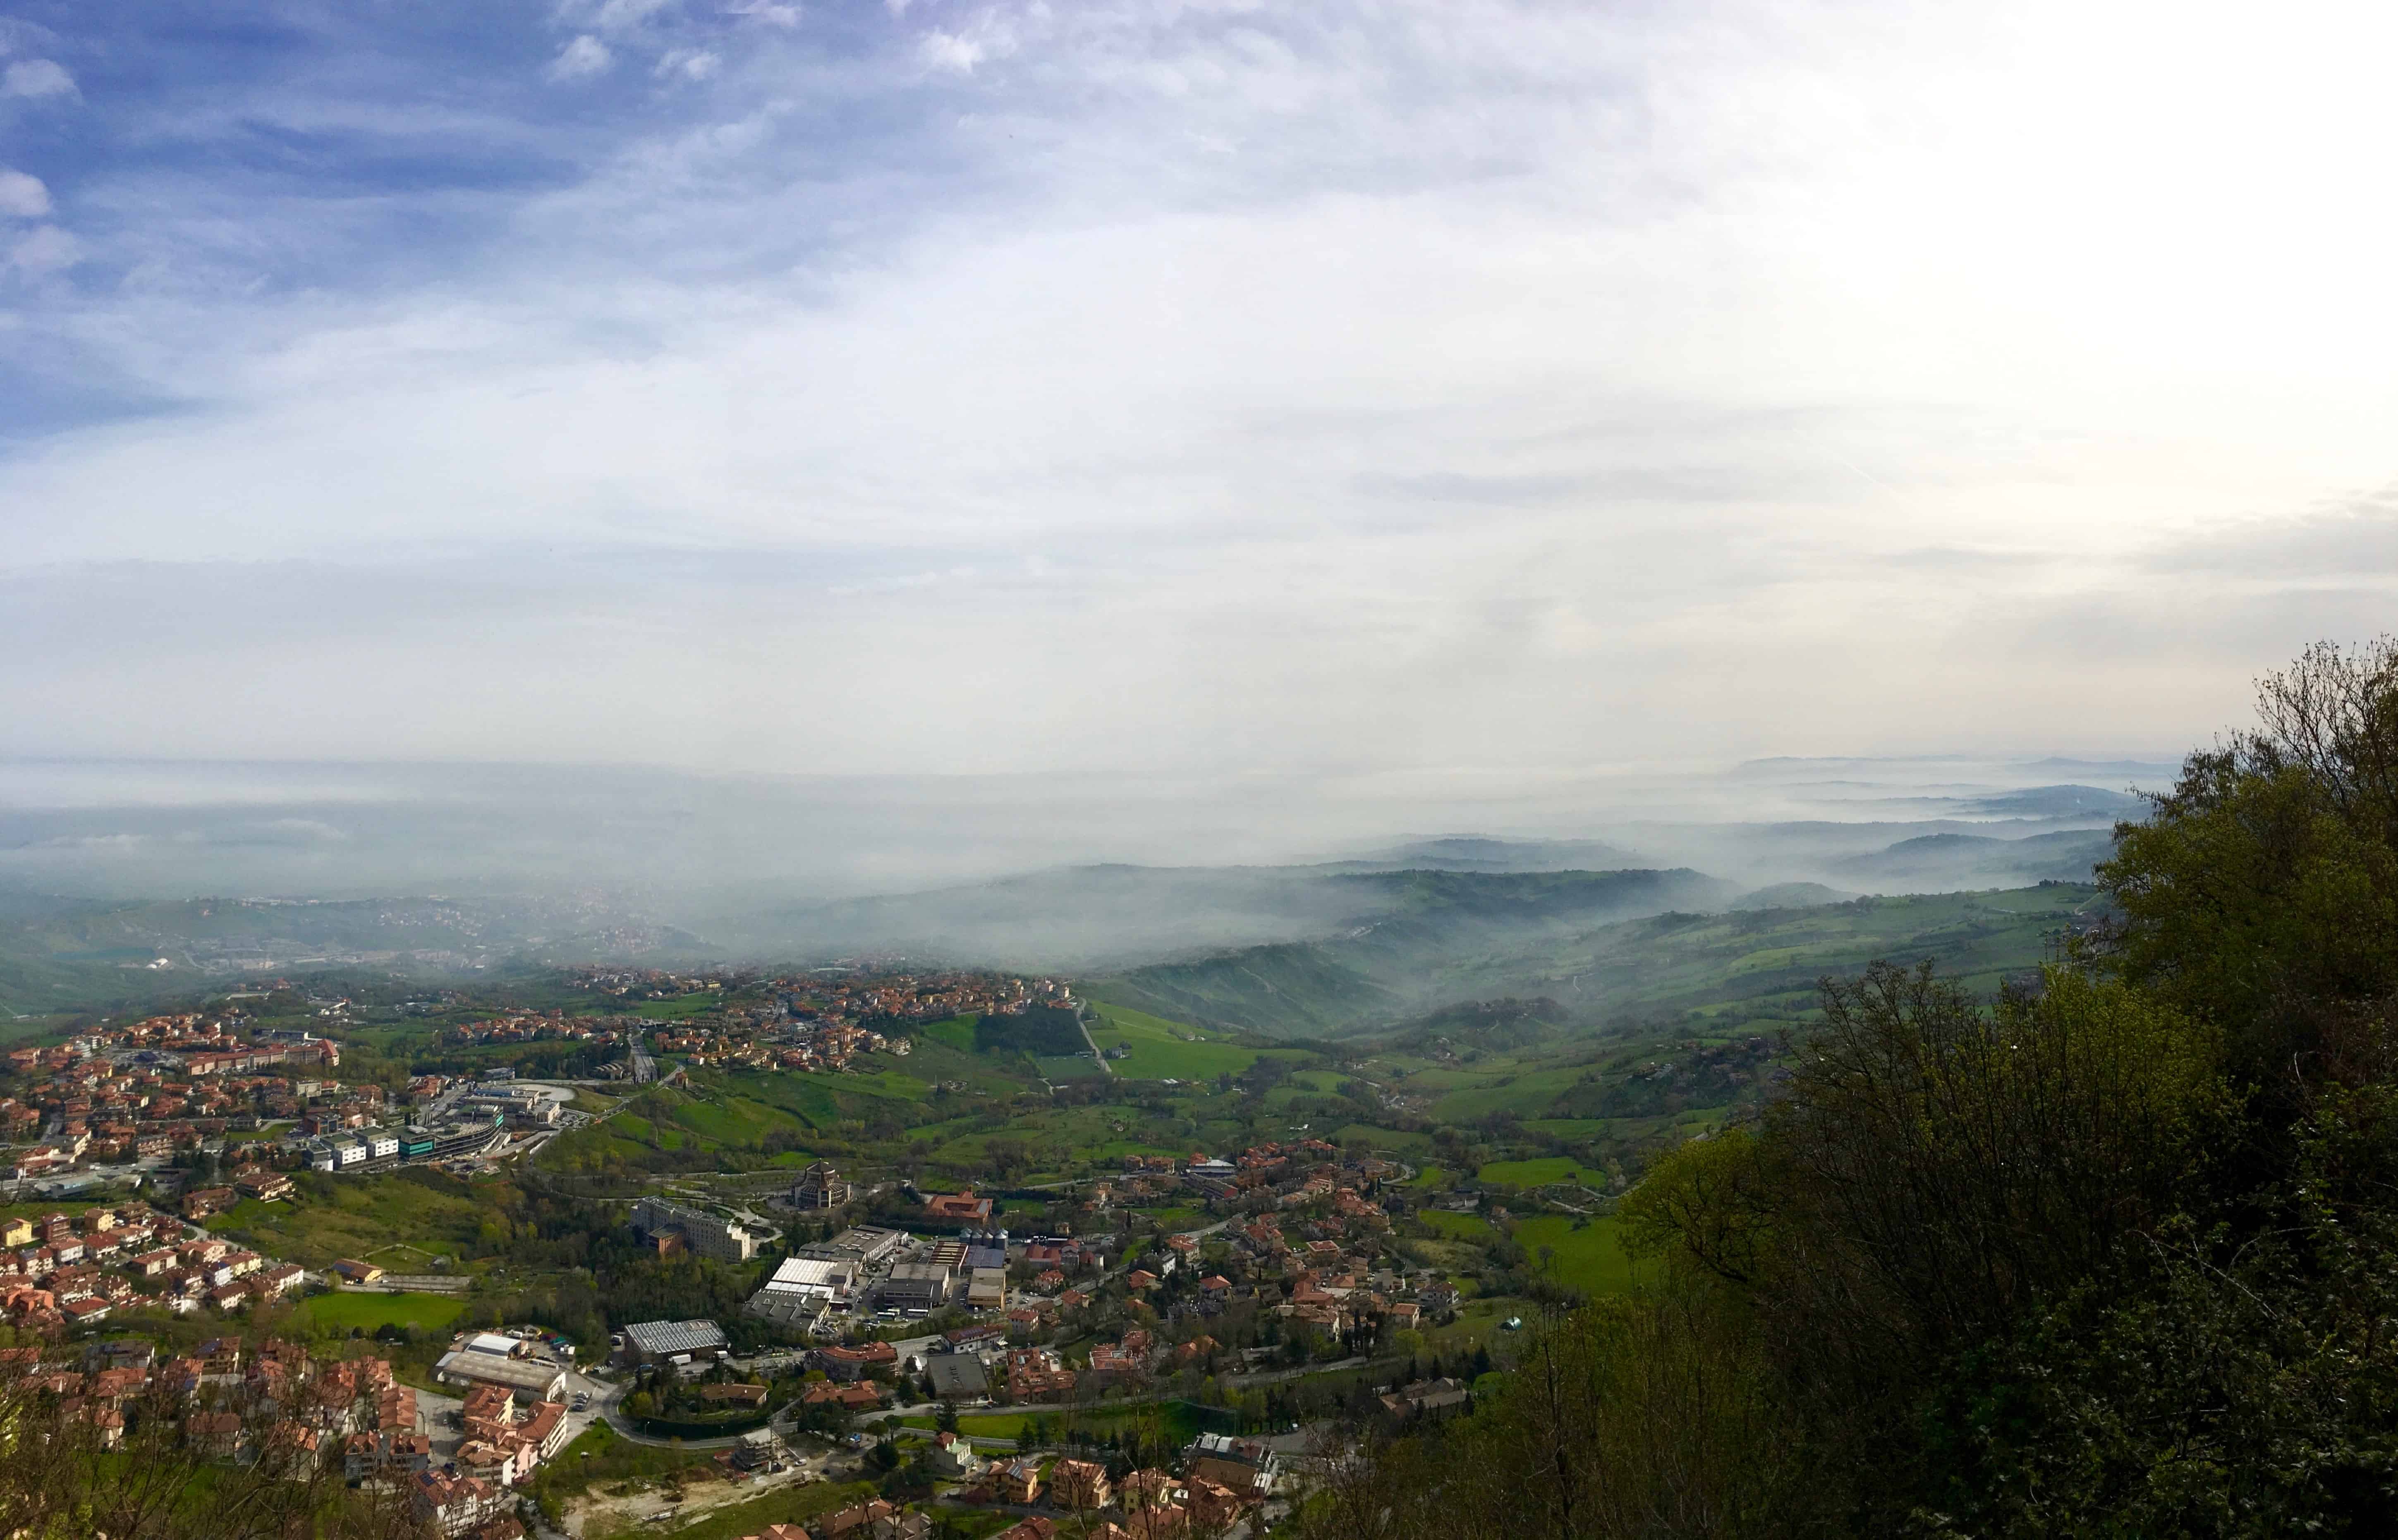 Blue Skies and Valleys with Mist - Looking Towards the Sea from Citta di San Marino.